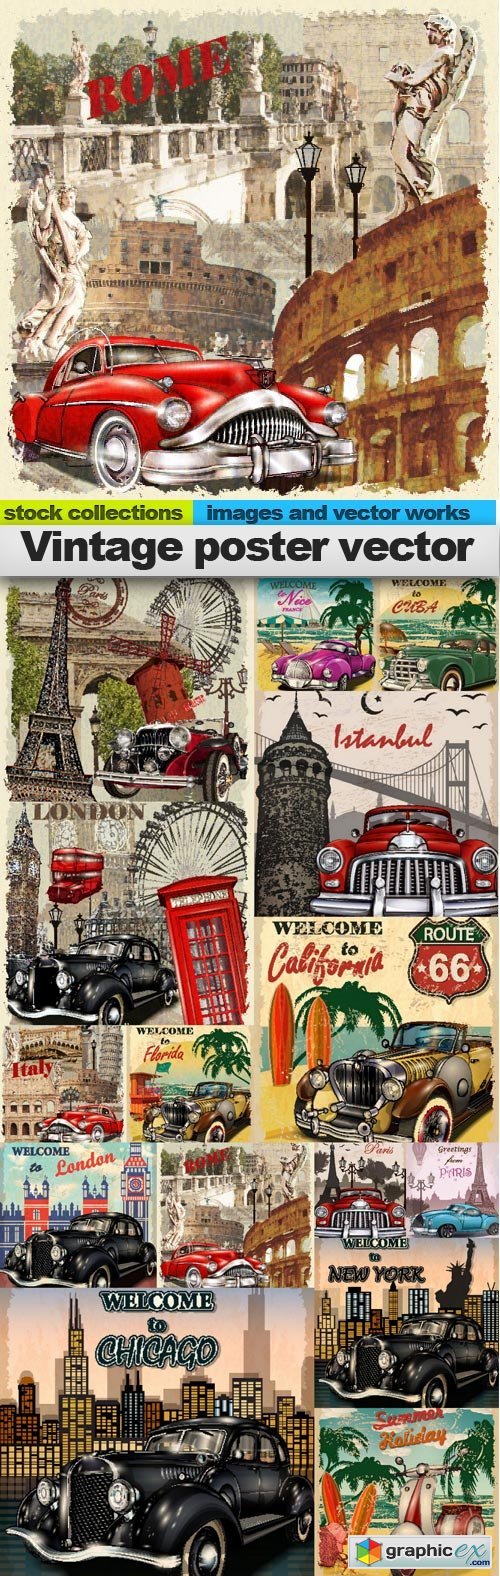 Vintage poster vector 2, 15 x EPS